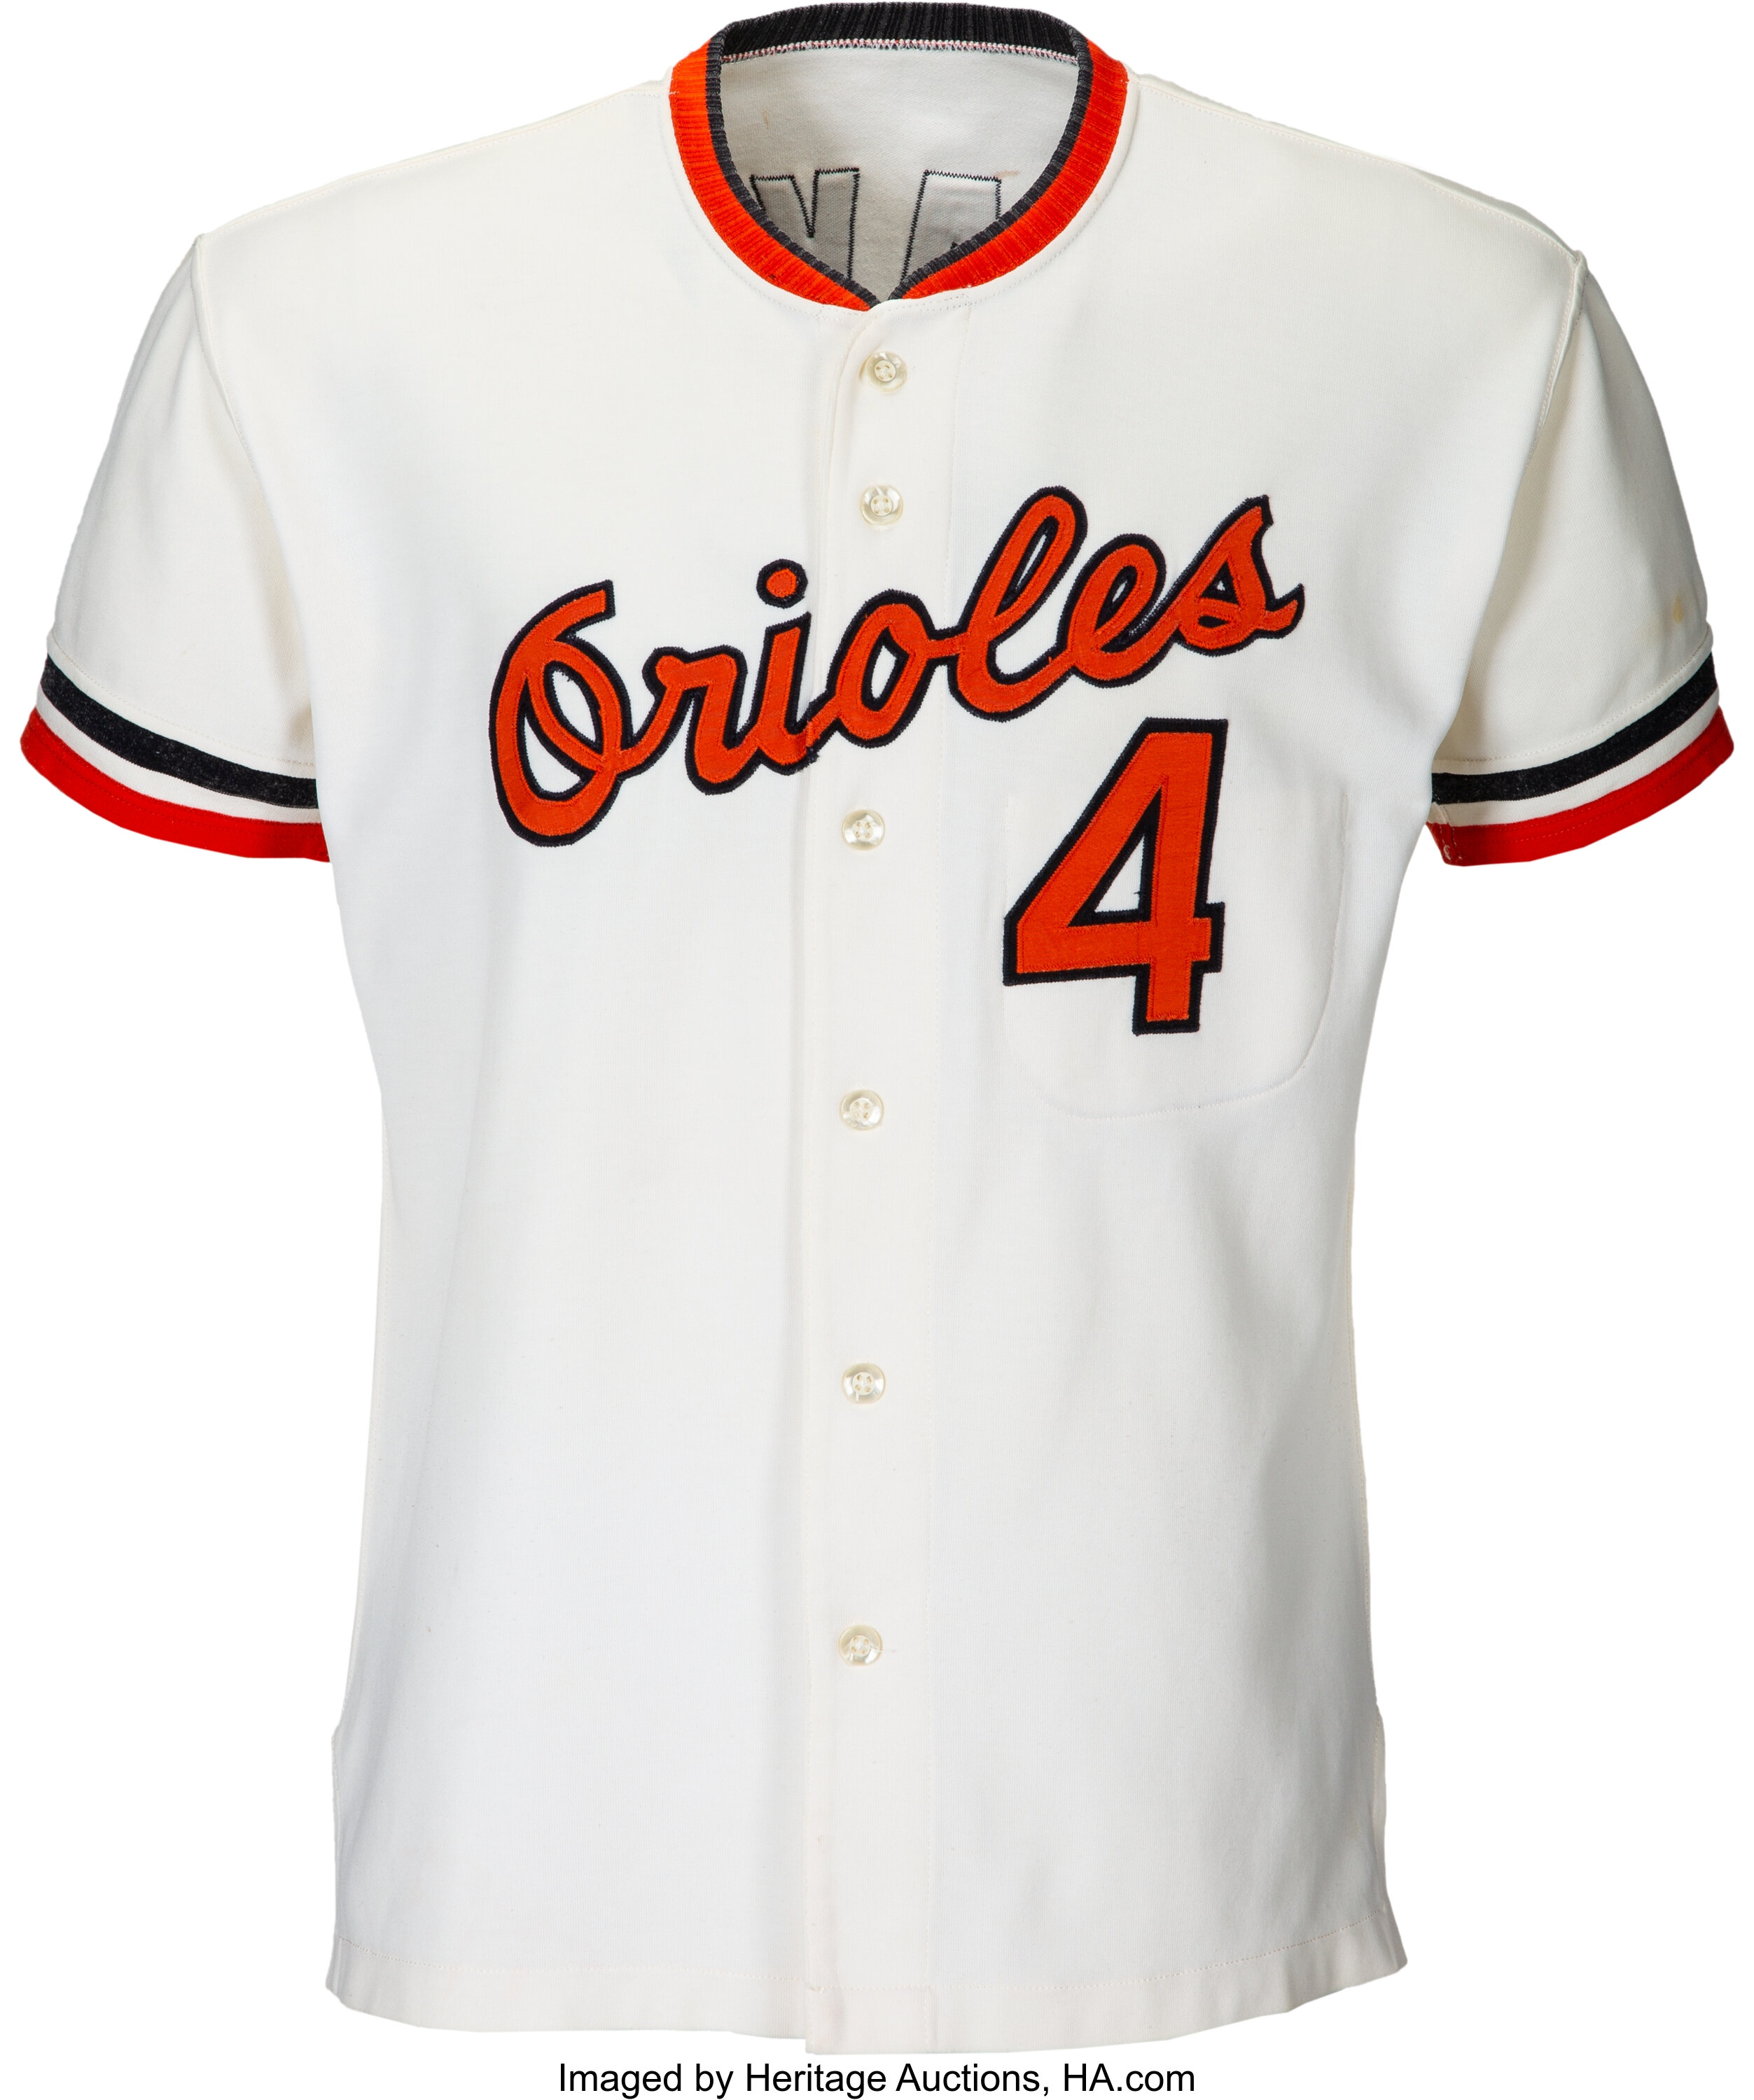 Orioles wear special Baltimore jersey in first game back home –  SportsLogos.Net News